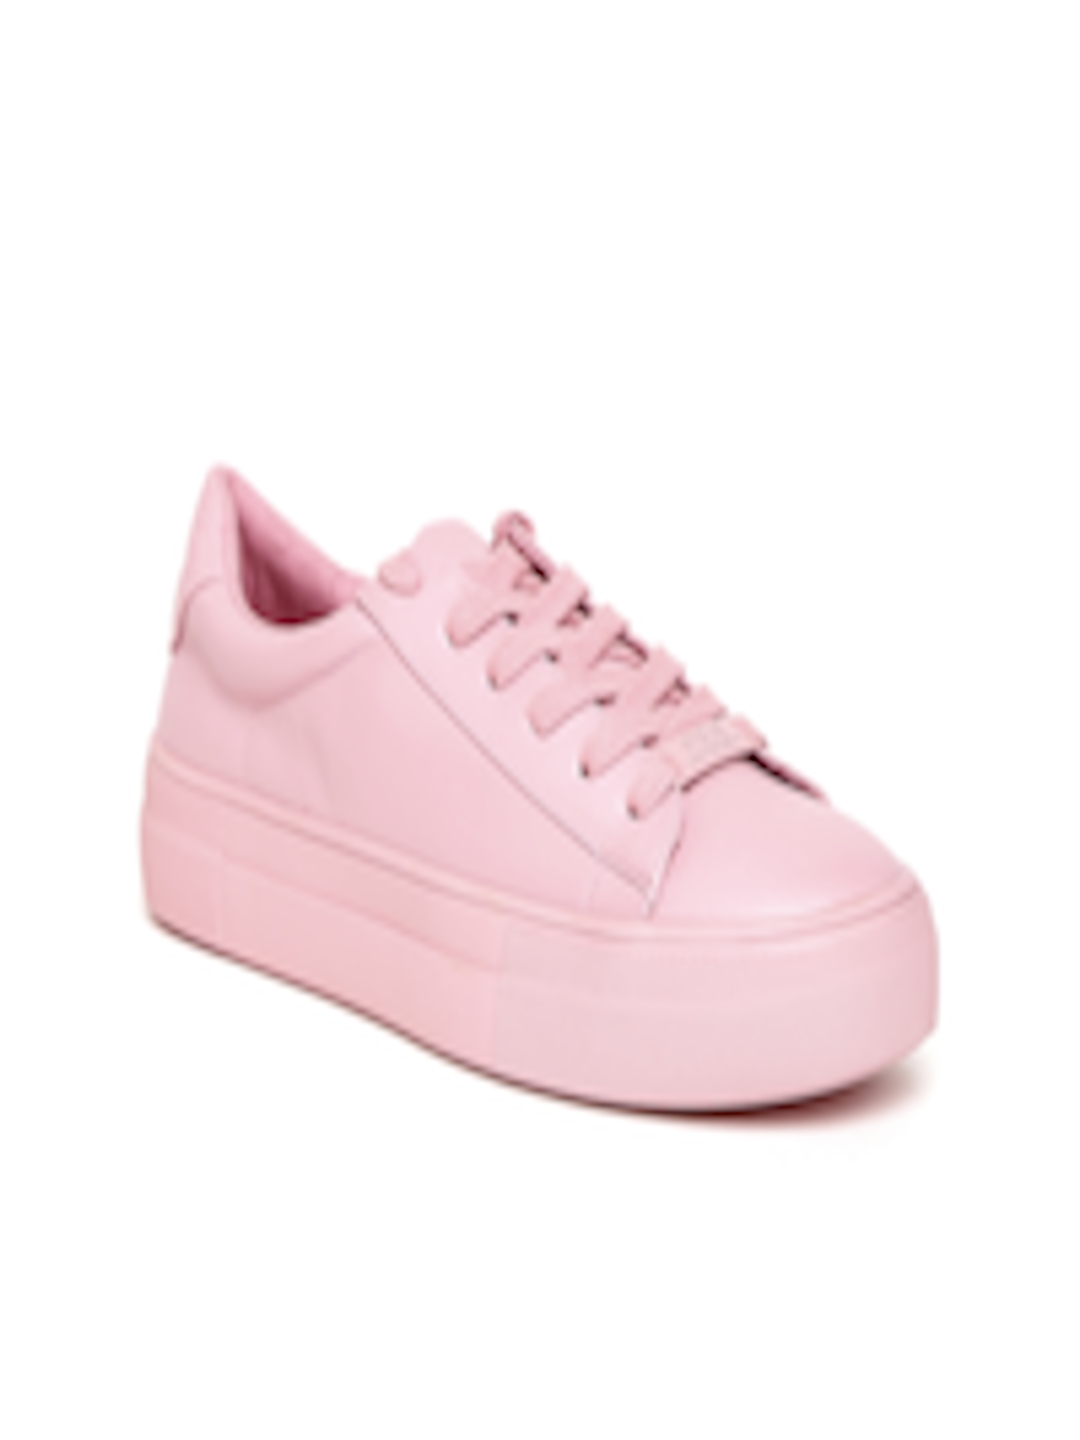 Buy Steve Madden Women Pink Sneakers - Casual Shoes for Women 2515067 ...